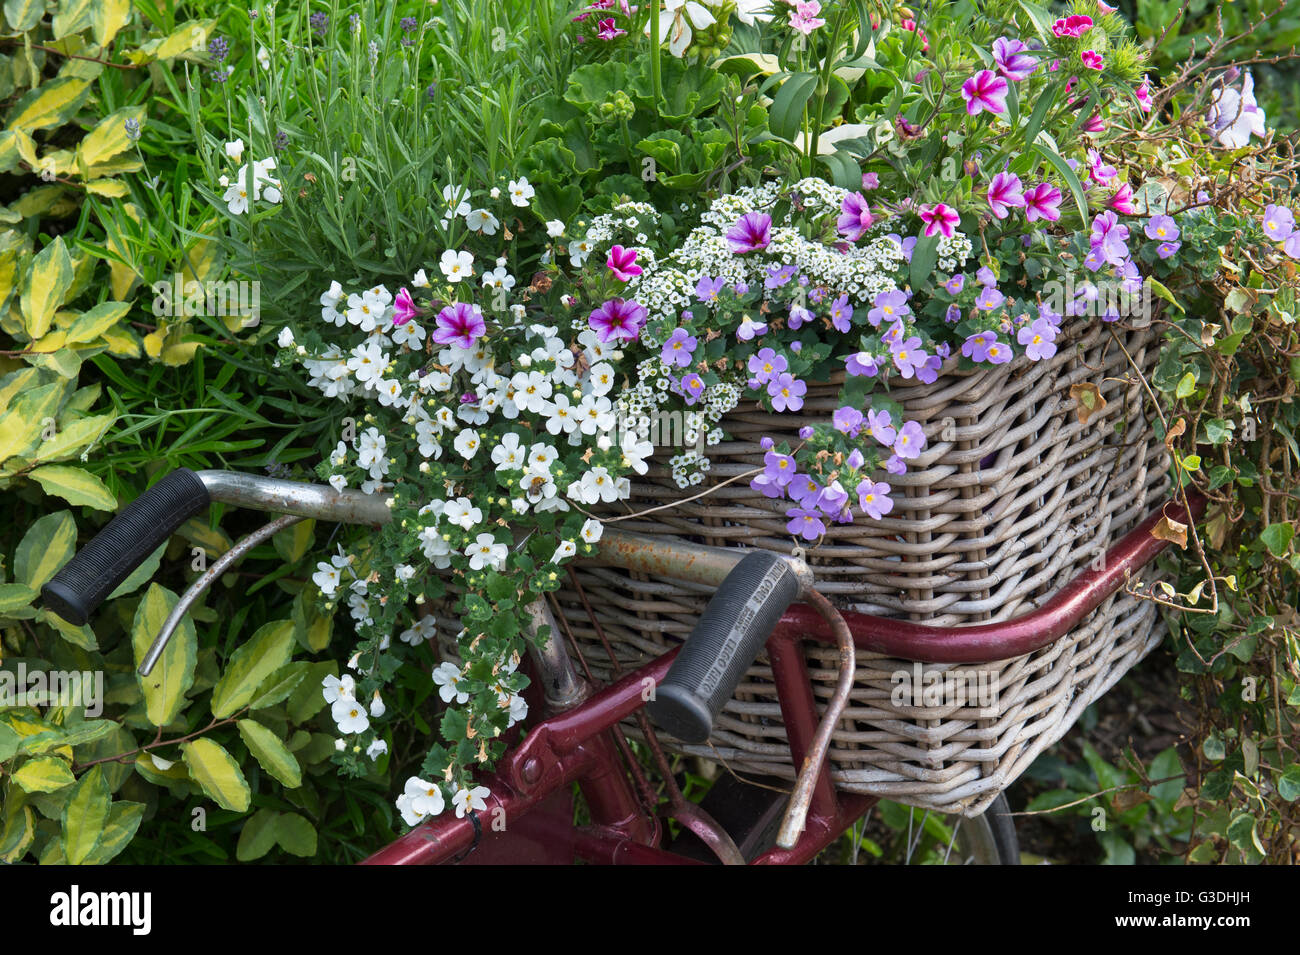 Old bicycle basket full of flowers outside The Old Swan public house, Minster Lovell, Oxfordshire, England Stock Photo